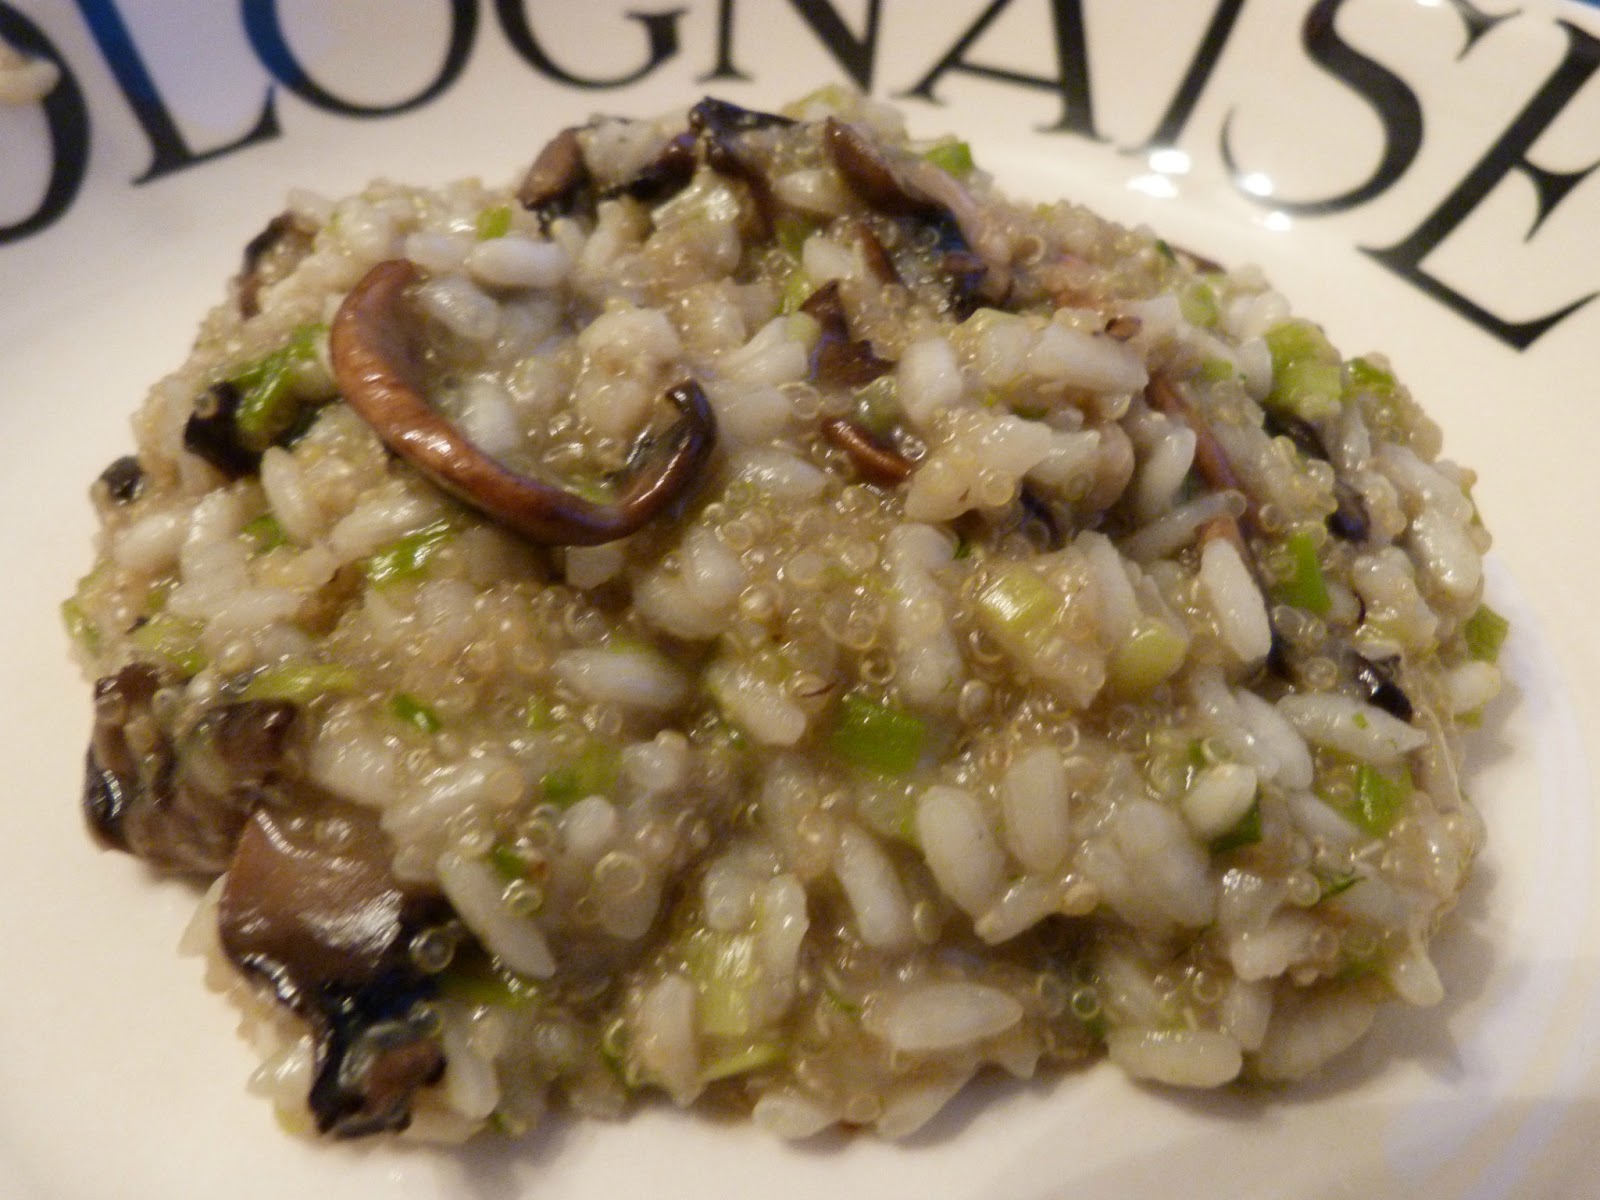 Healthy Mushroom Risotto - The Runner Beans